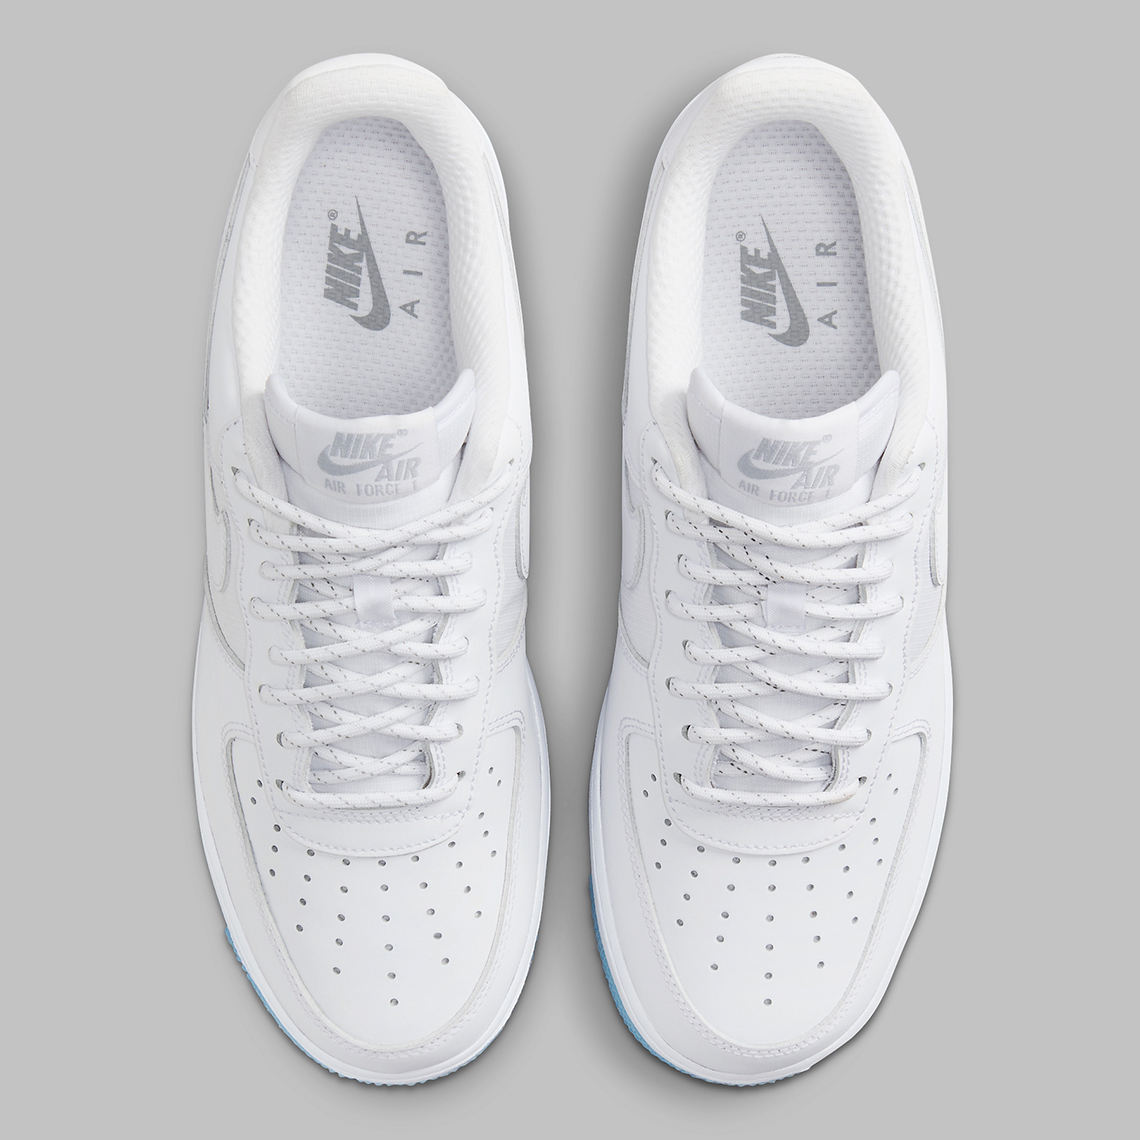 Nike Air Force 1 Low White Icy Soles Fv0383 100 1